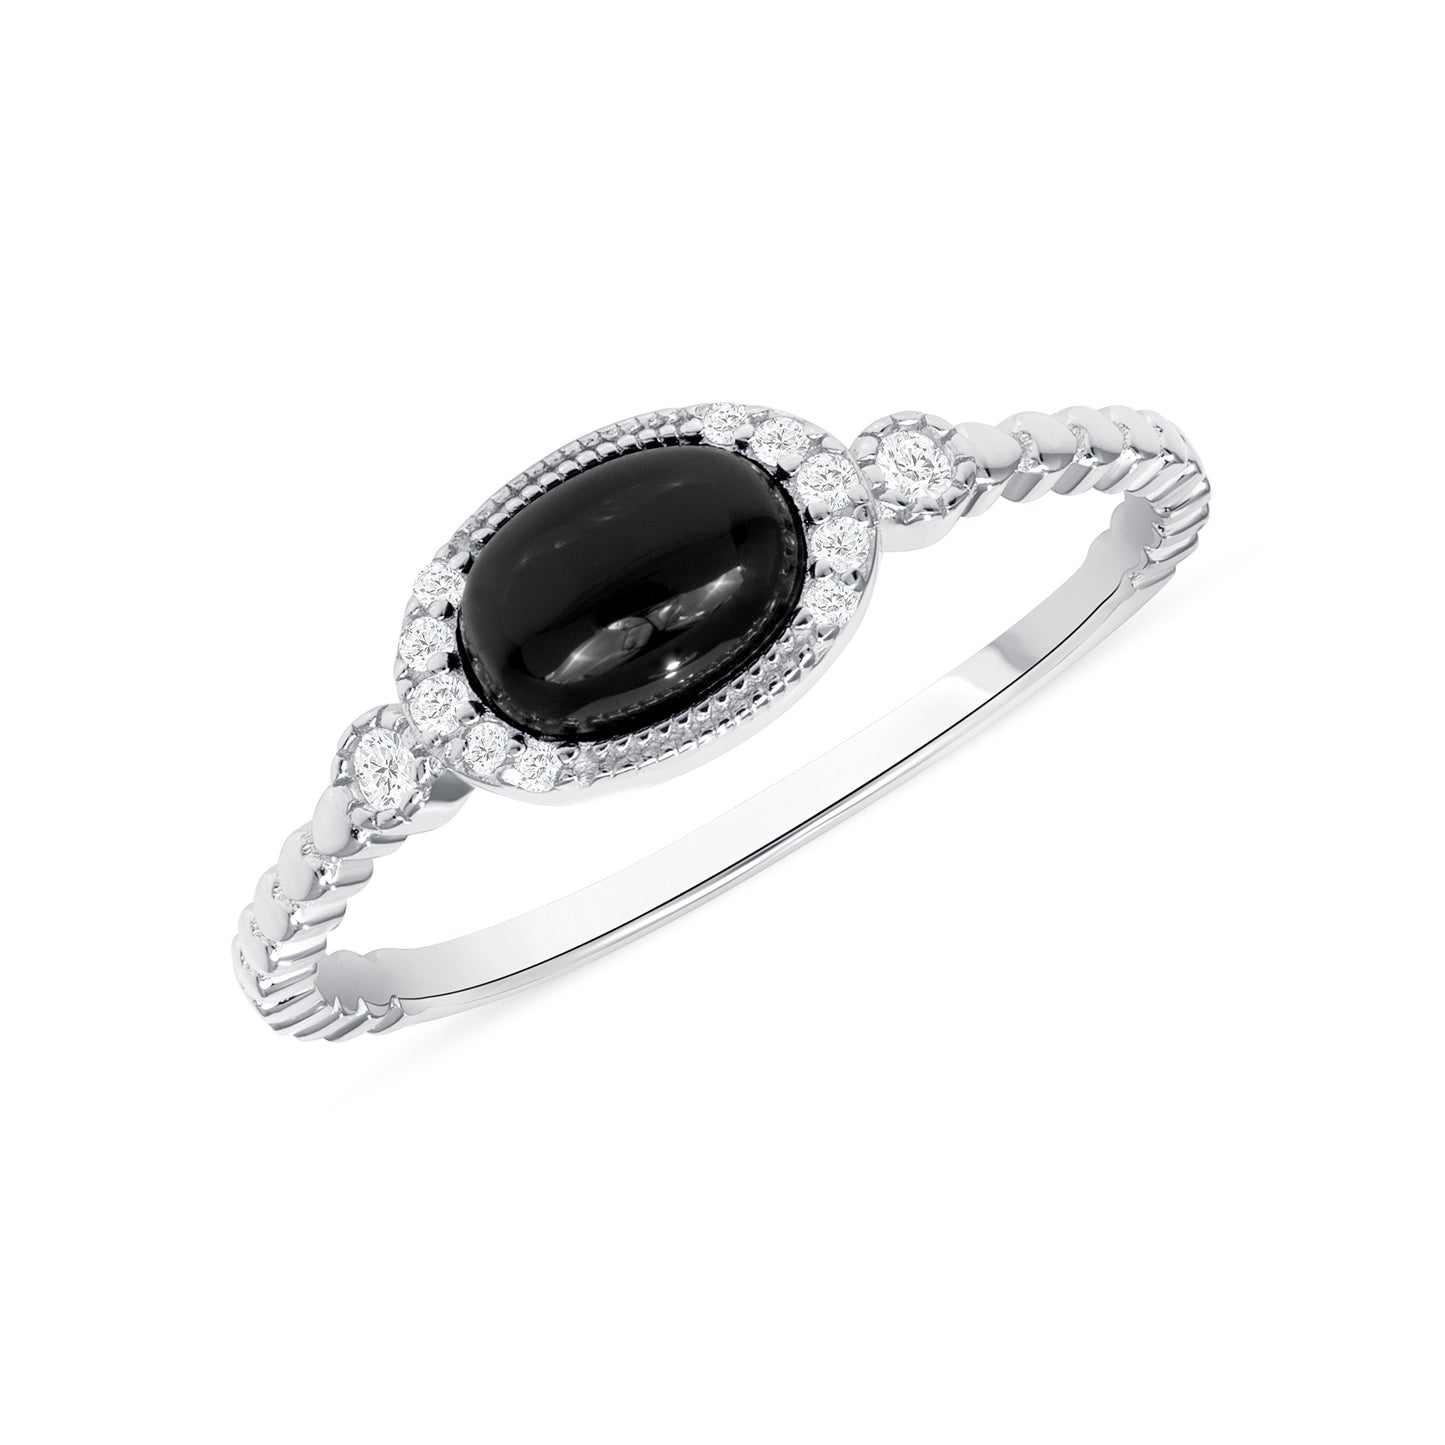 Silver 925 Onyx Oval Micro Pave Ring. DGR2316ONYX